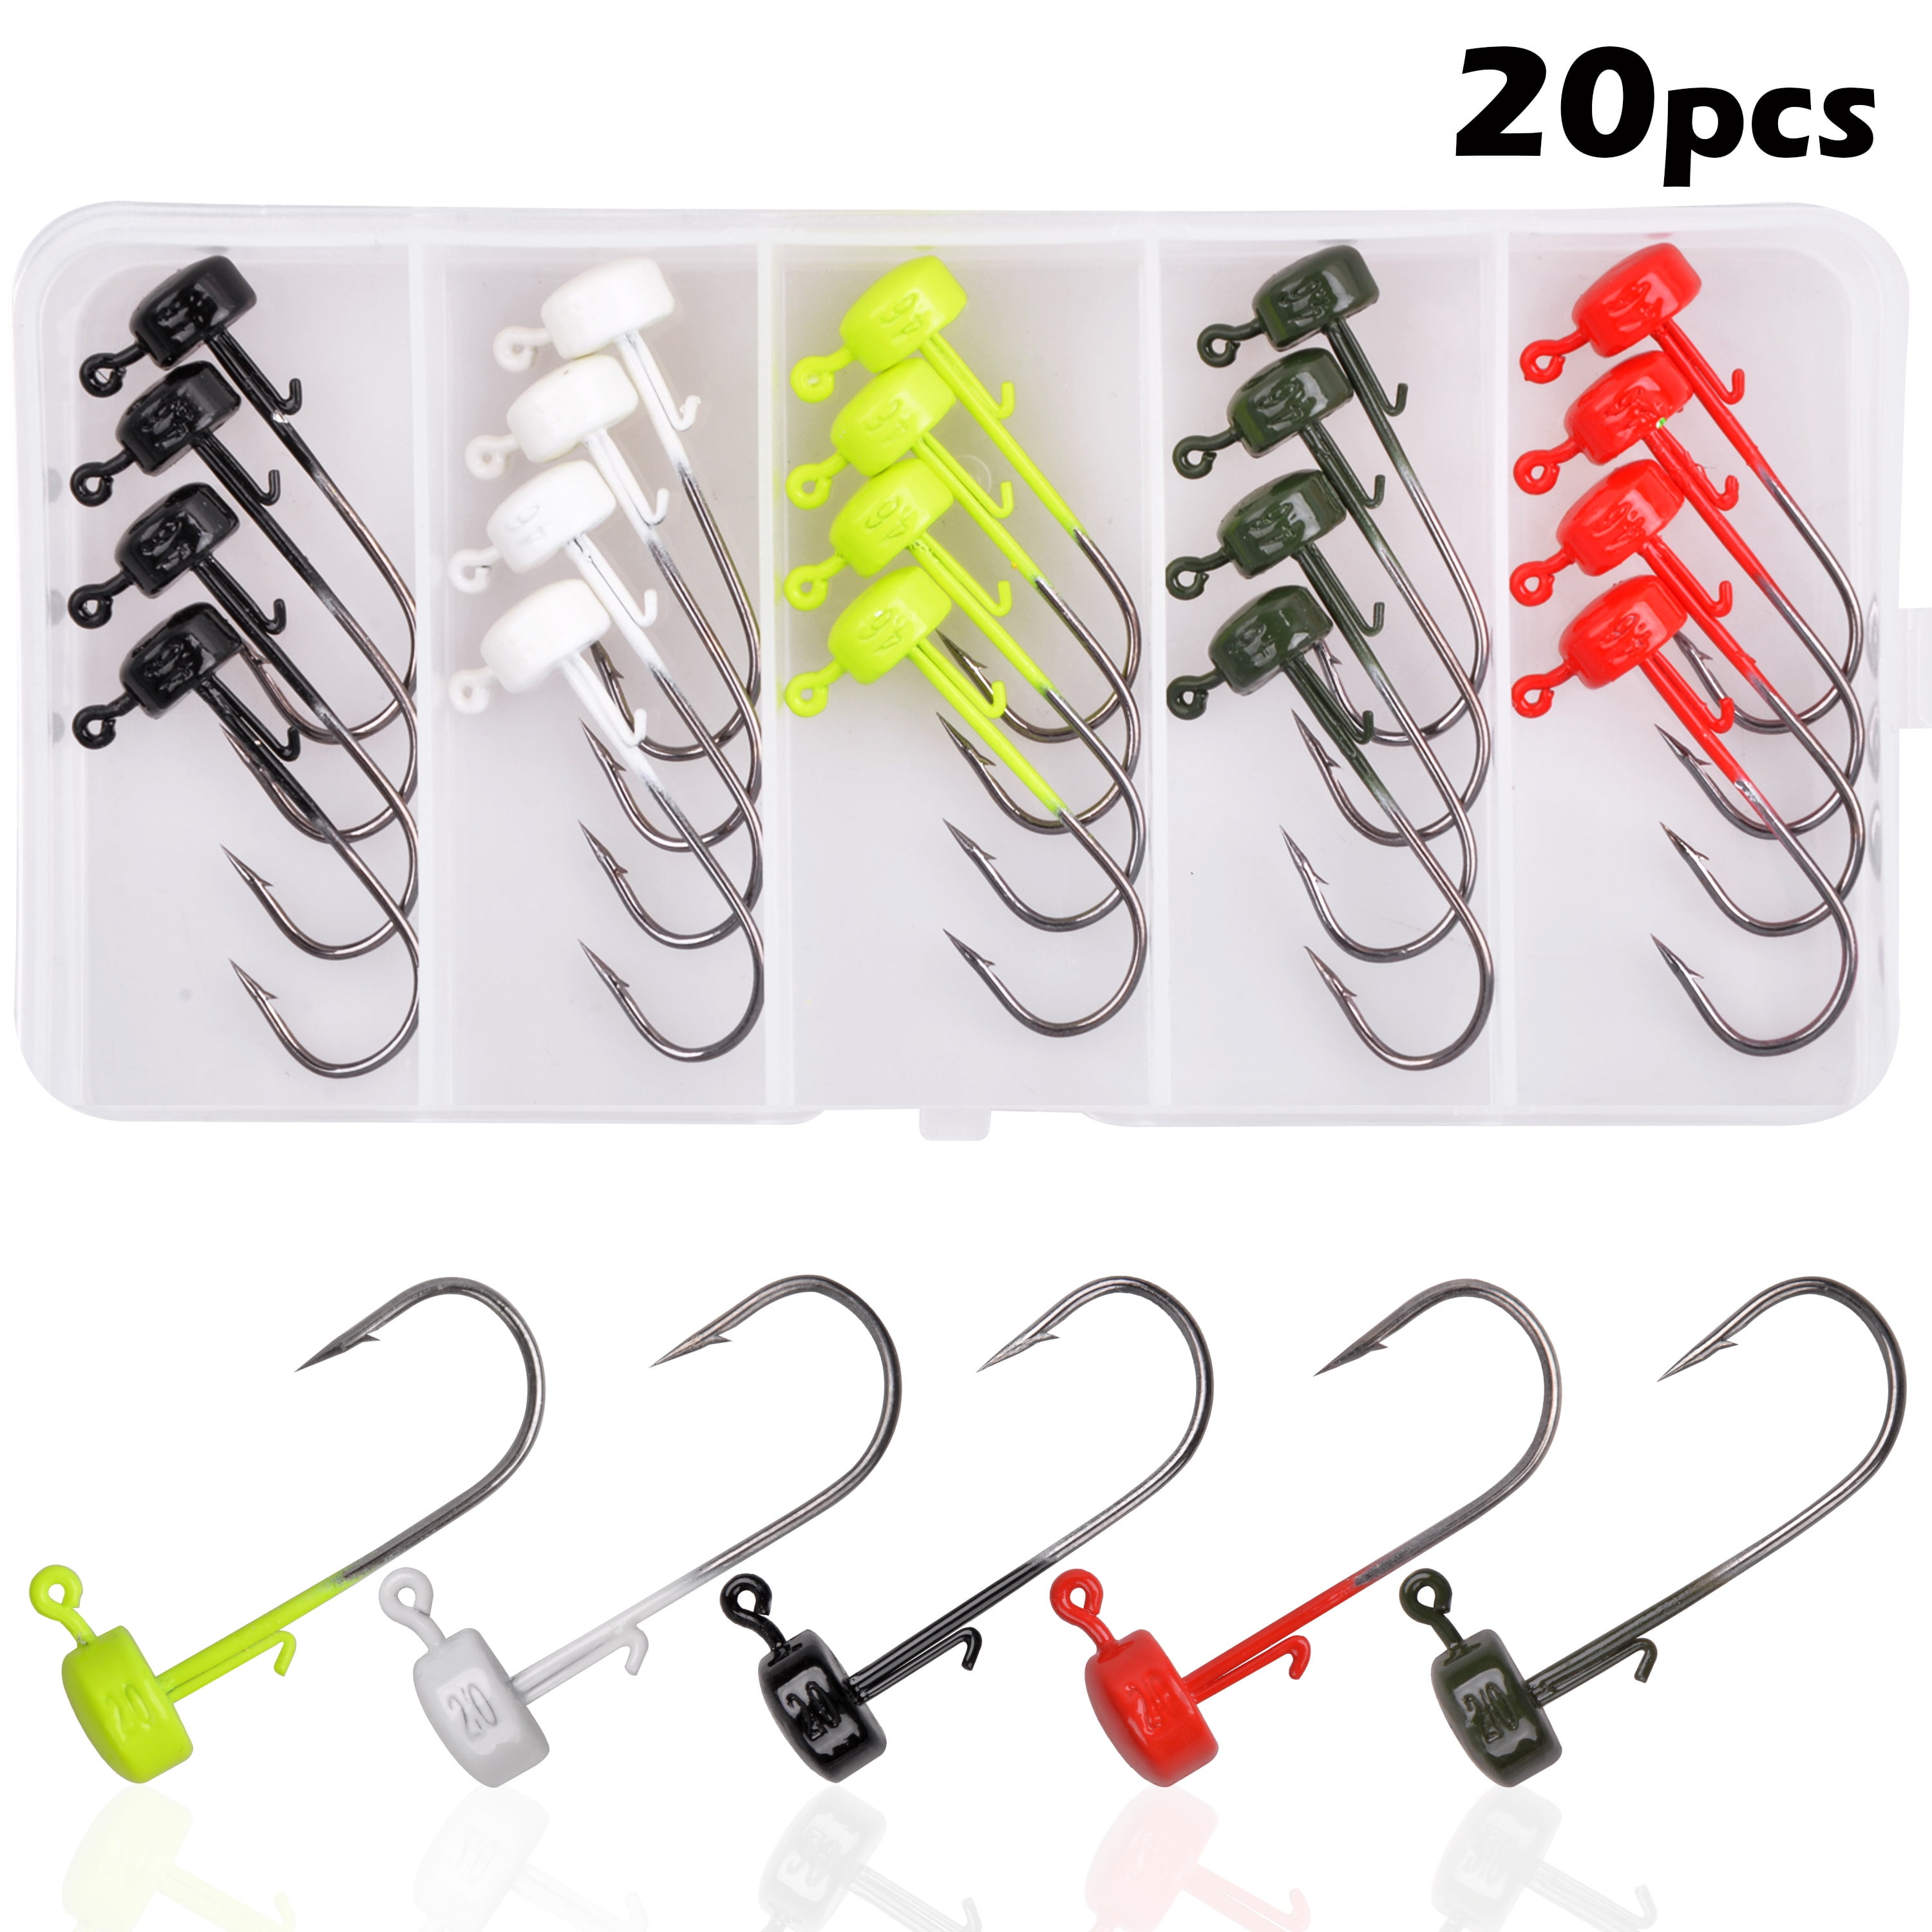 Fishing Jig Head Hooks,20pcs Fishing Lure Bass Crappie Jig Head with Eyes  Ball Spinner Blade Spin Jig Hook for Bass Trout Walley 1/16oz 1/8oz 3/16oz